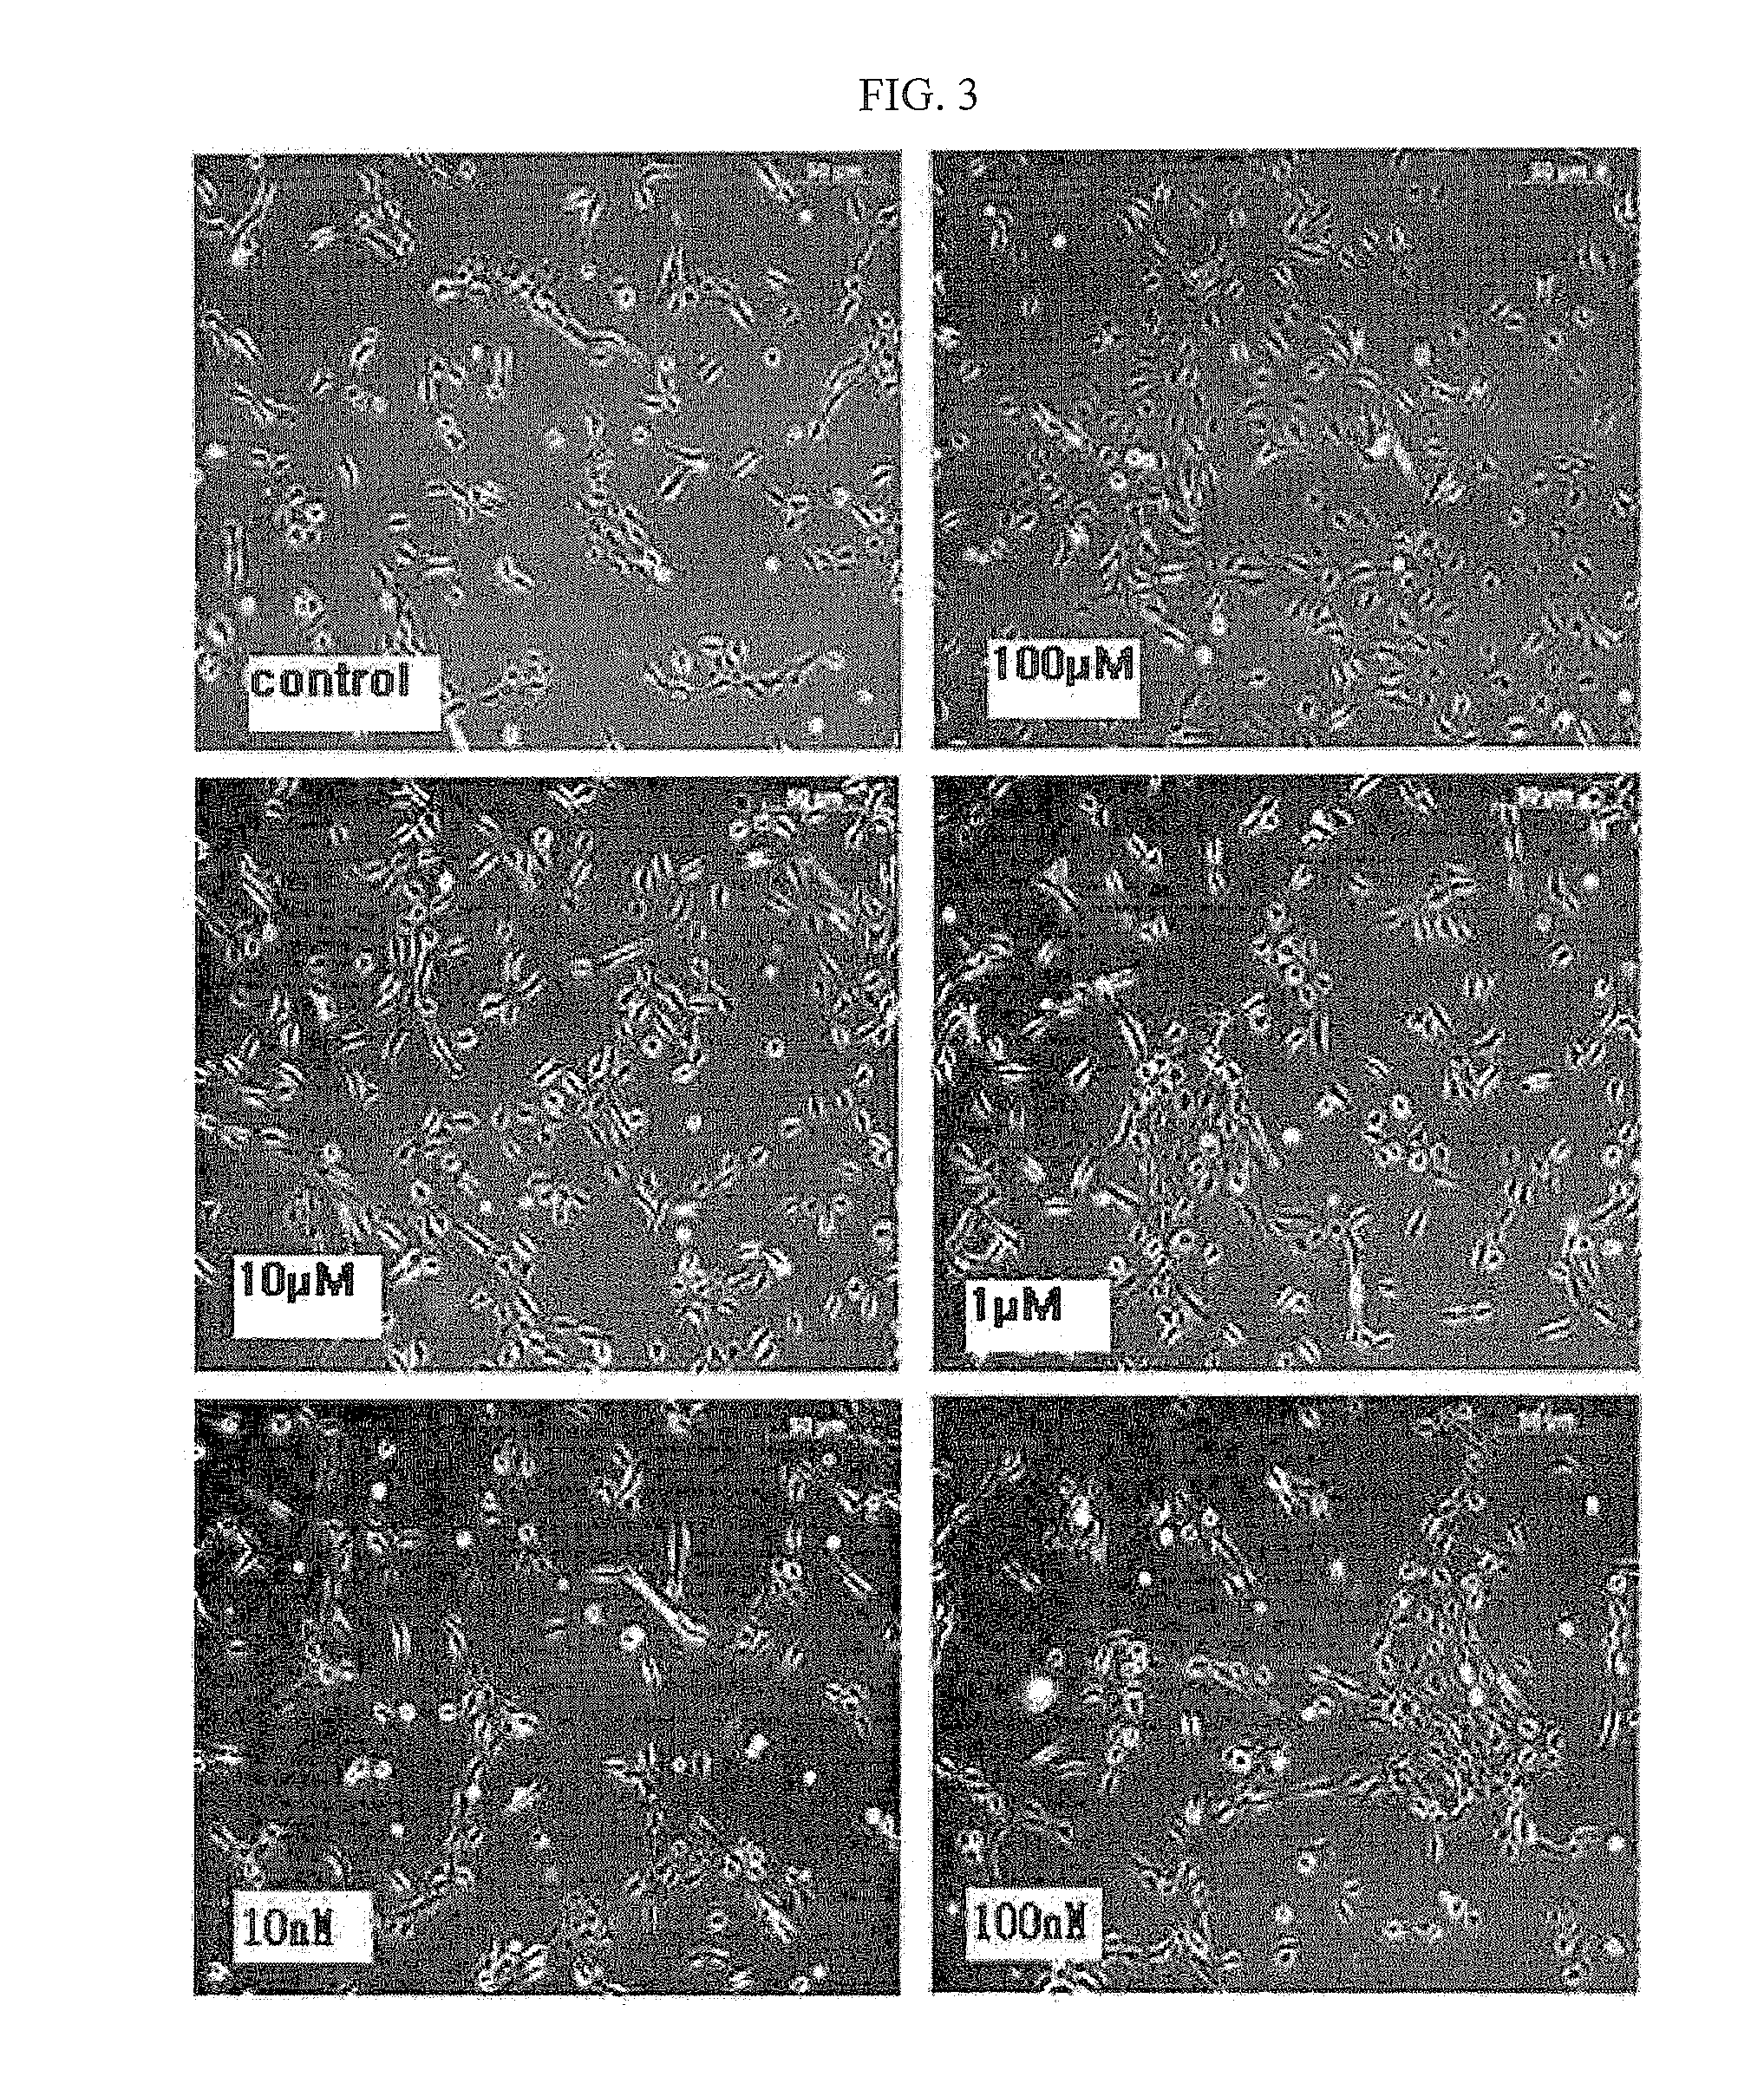 Method for isolating and culturing adult stem cells derived from human amniotic epithelium